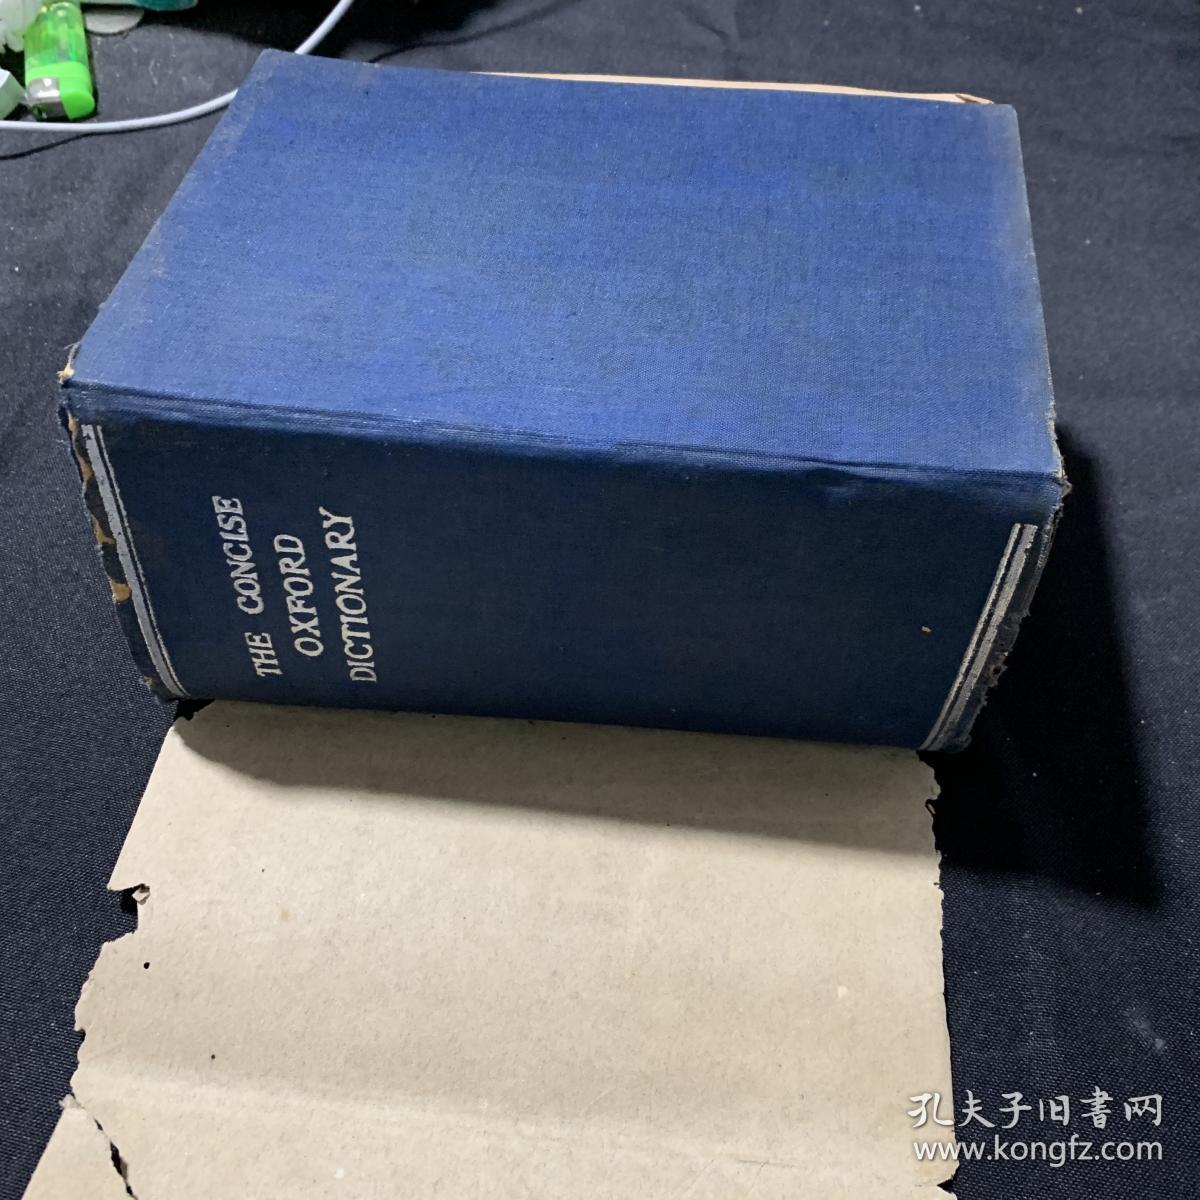 THE CONCISE OXFORD DICTIONARY简明牛津字典[1536页 1946年第三版